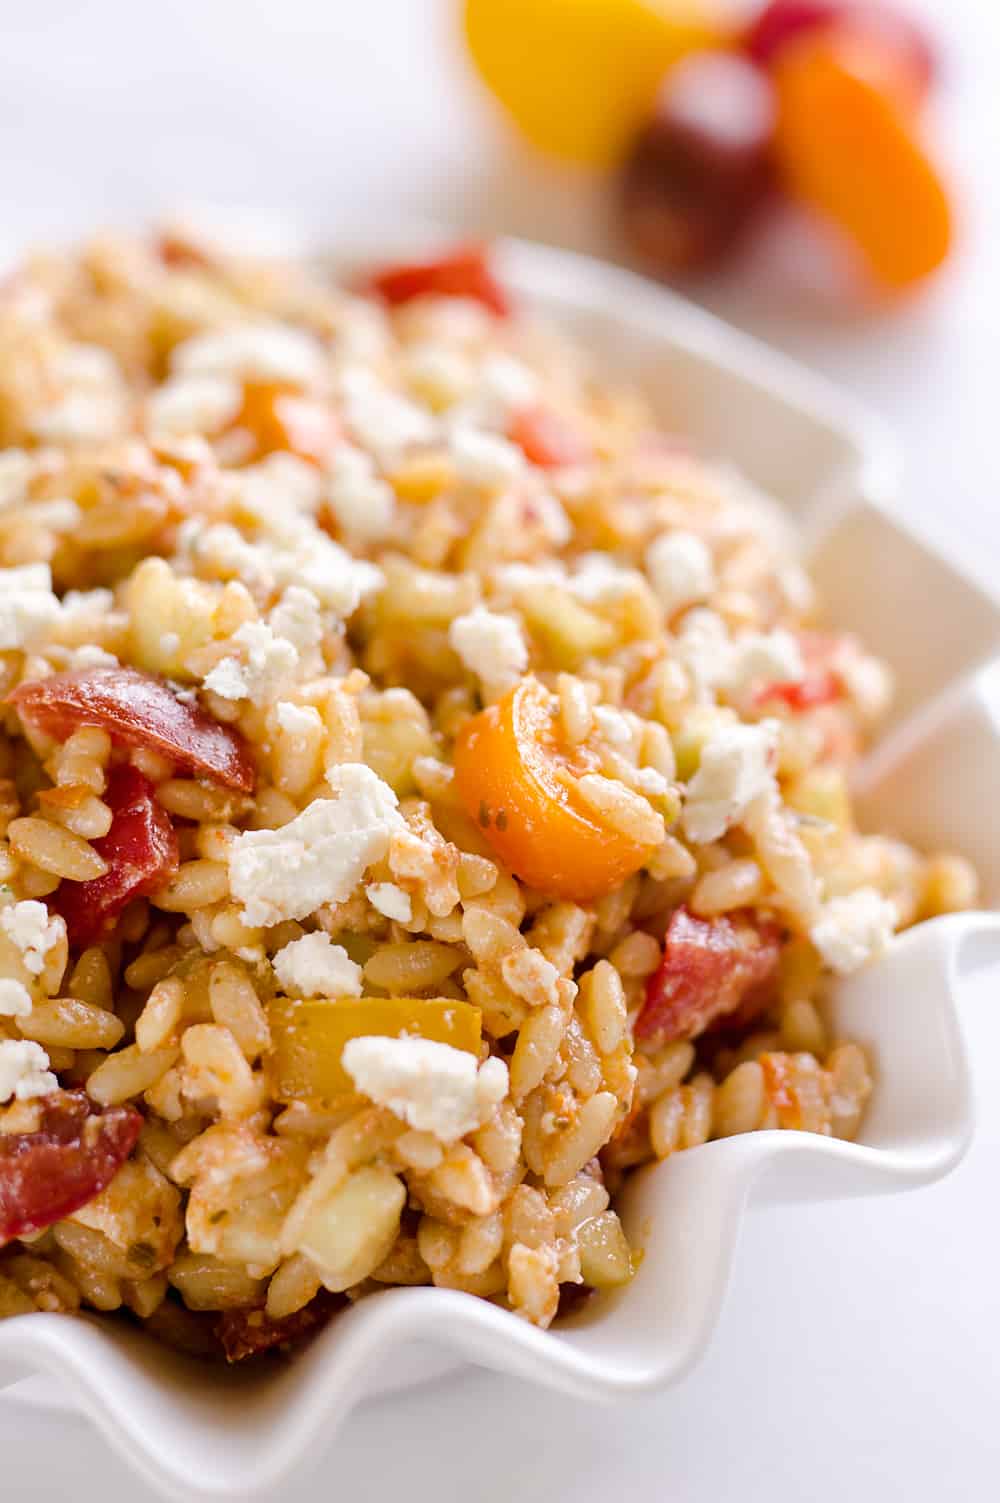 Sundried Tomato Feta Orzo Salad is an easy and unique pasta salad that makes a great side dish for any holiday meal!